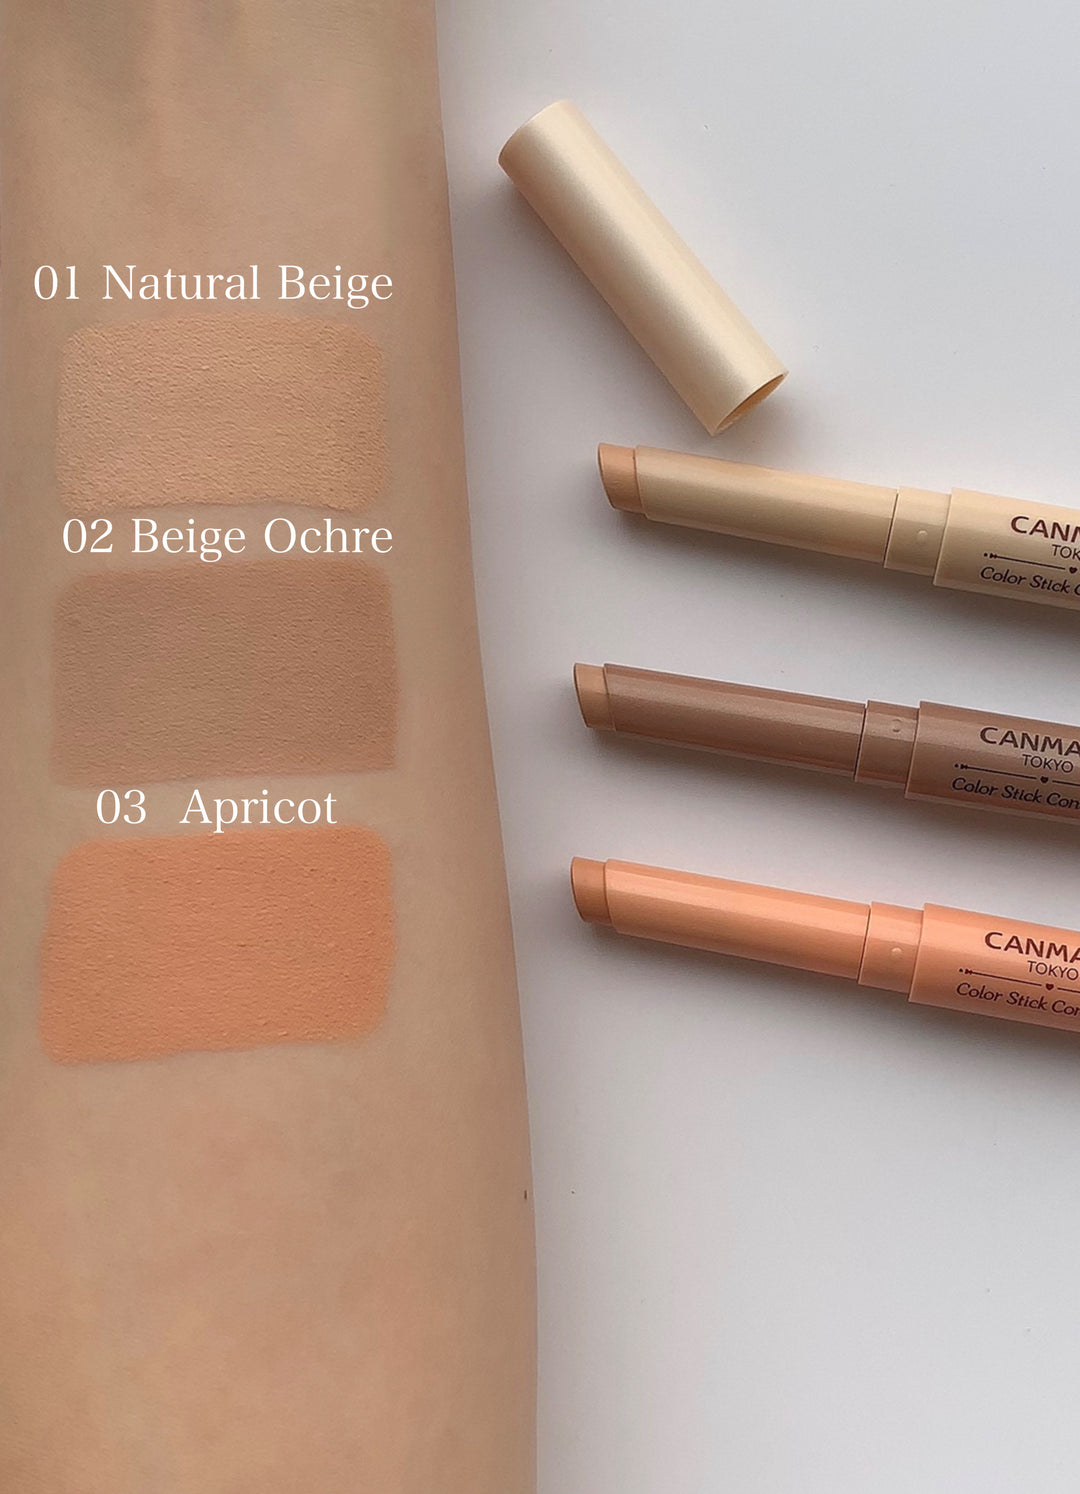 Canmake Color Stick Concealer 03 Apricot